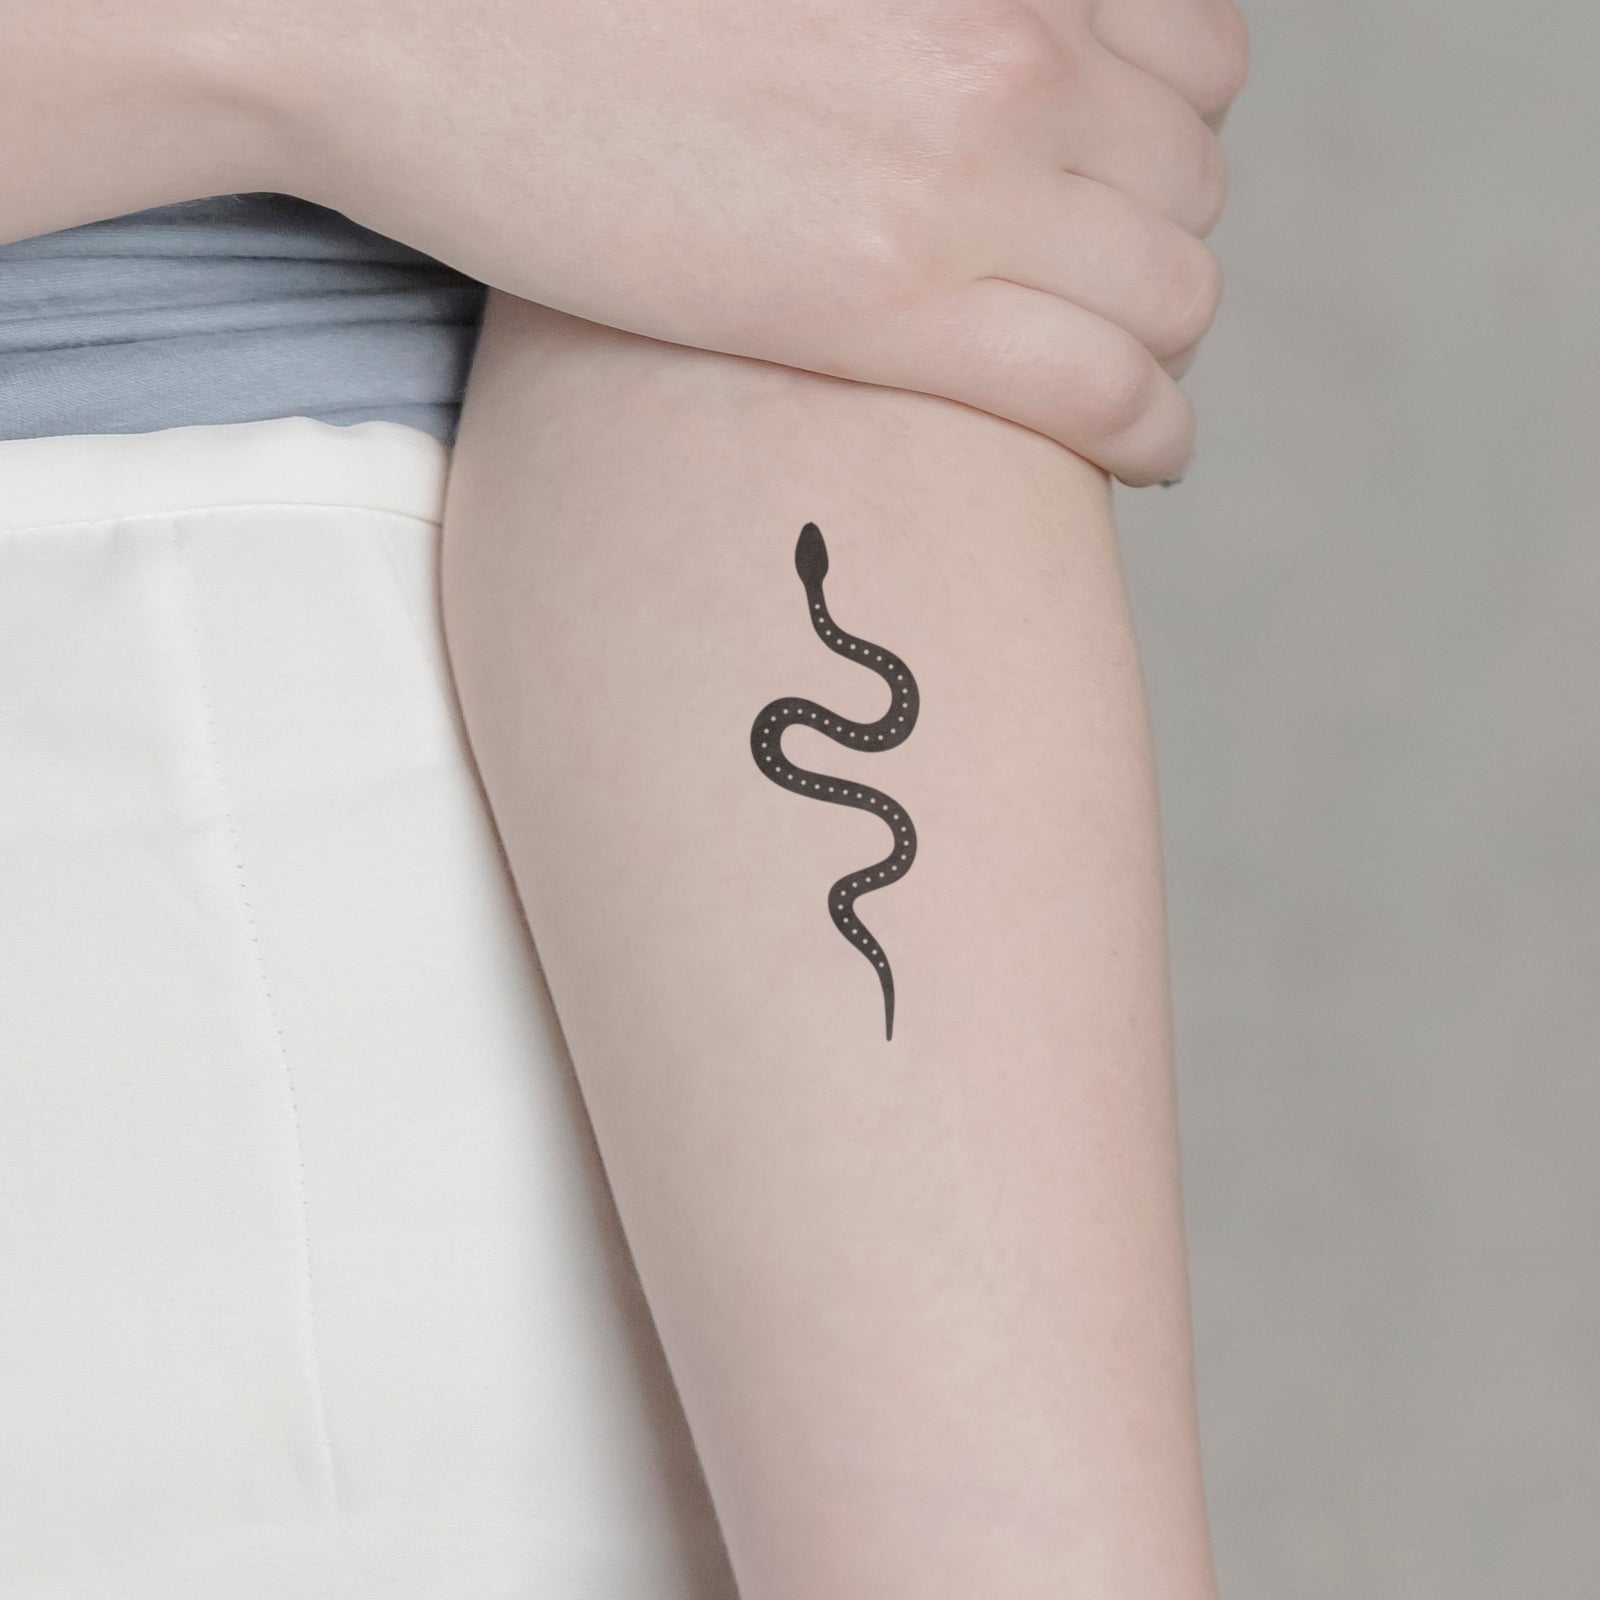 9 Best Snake Tattoo Designs and Ideas | Styles At Life